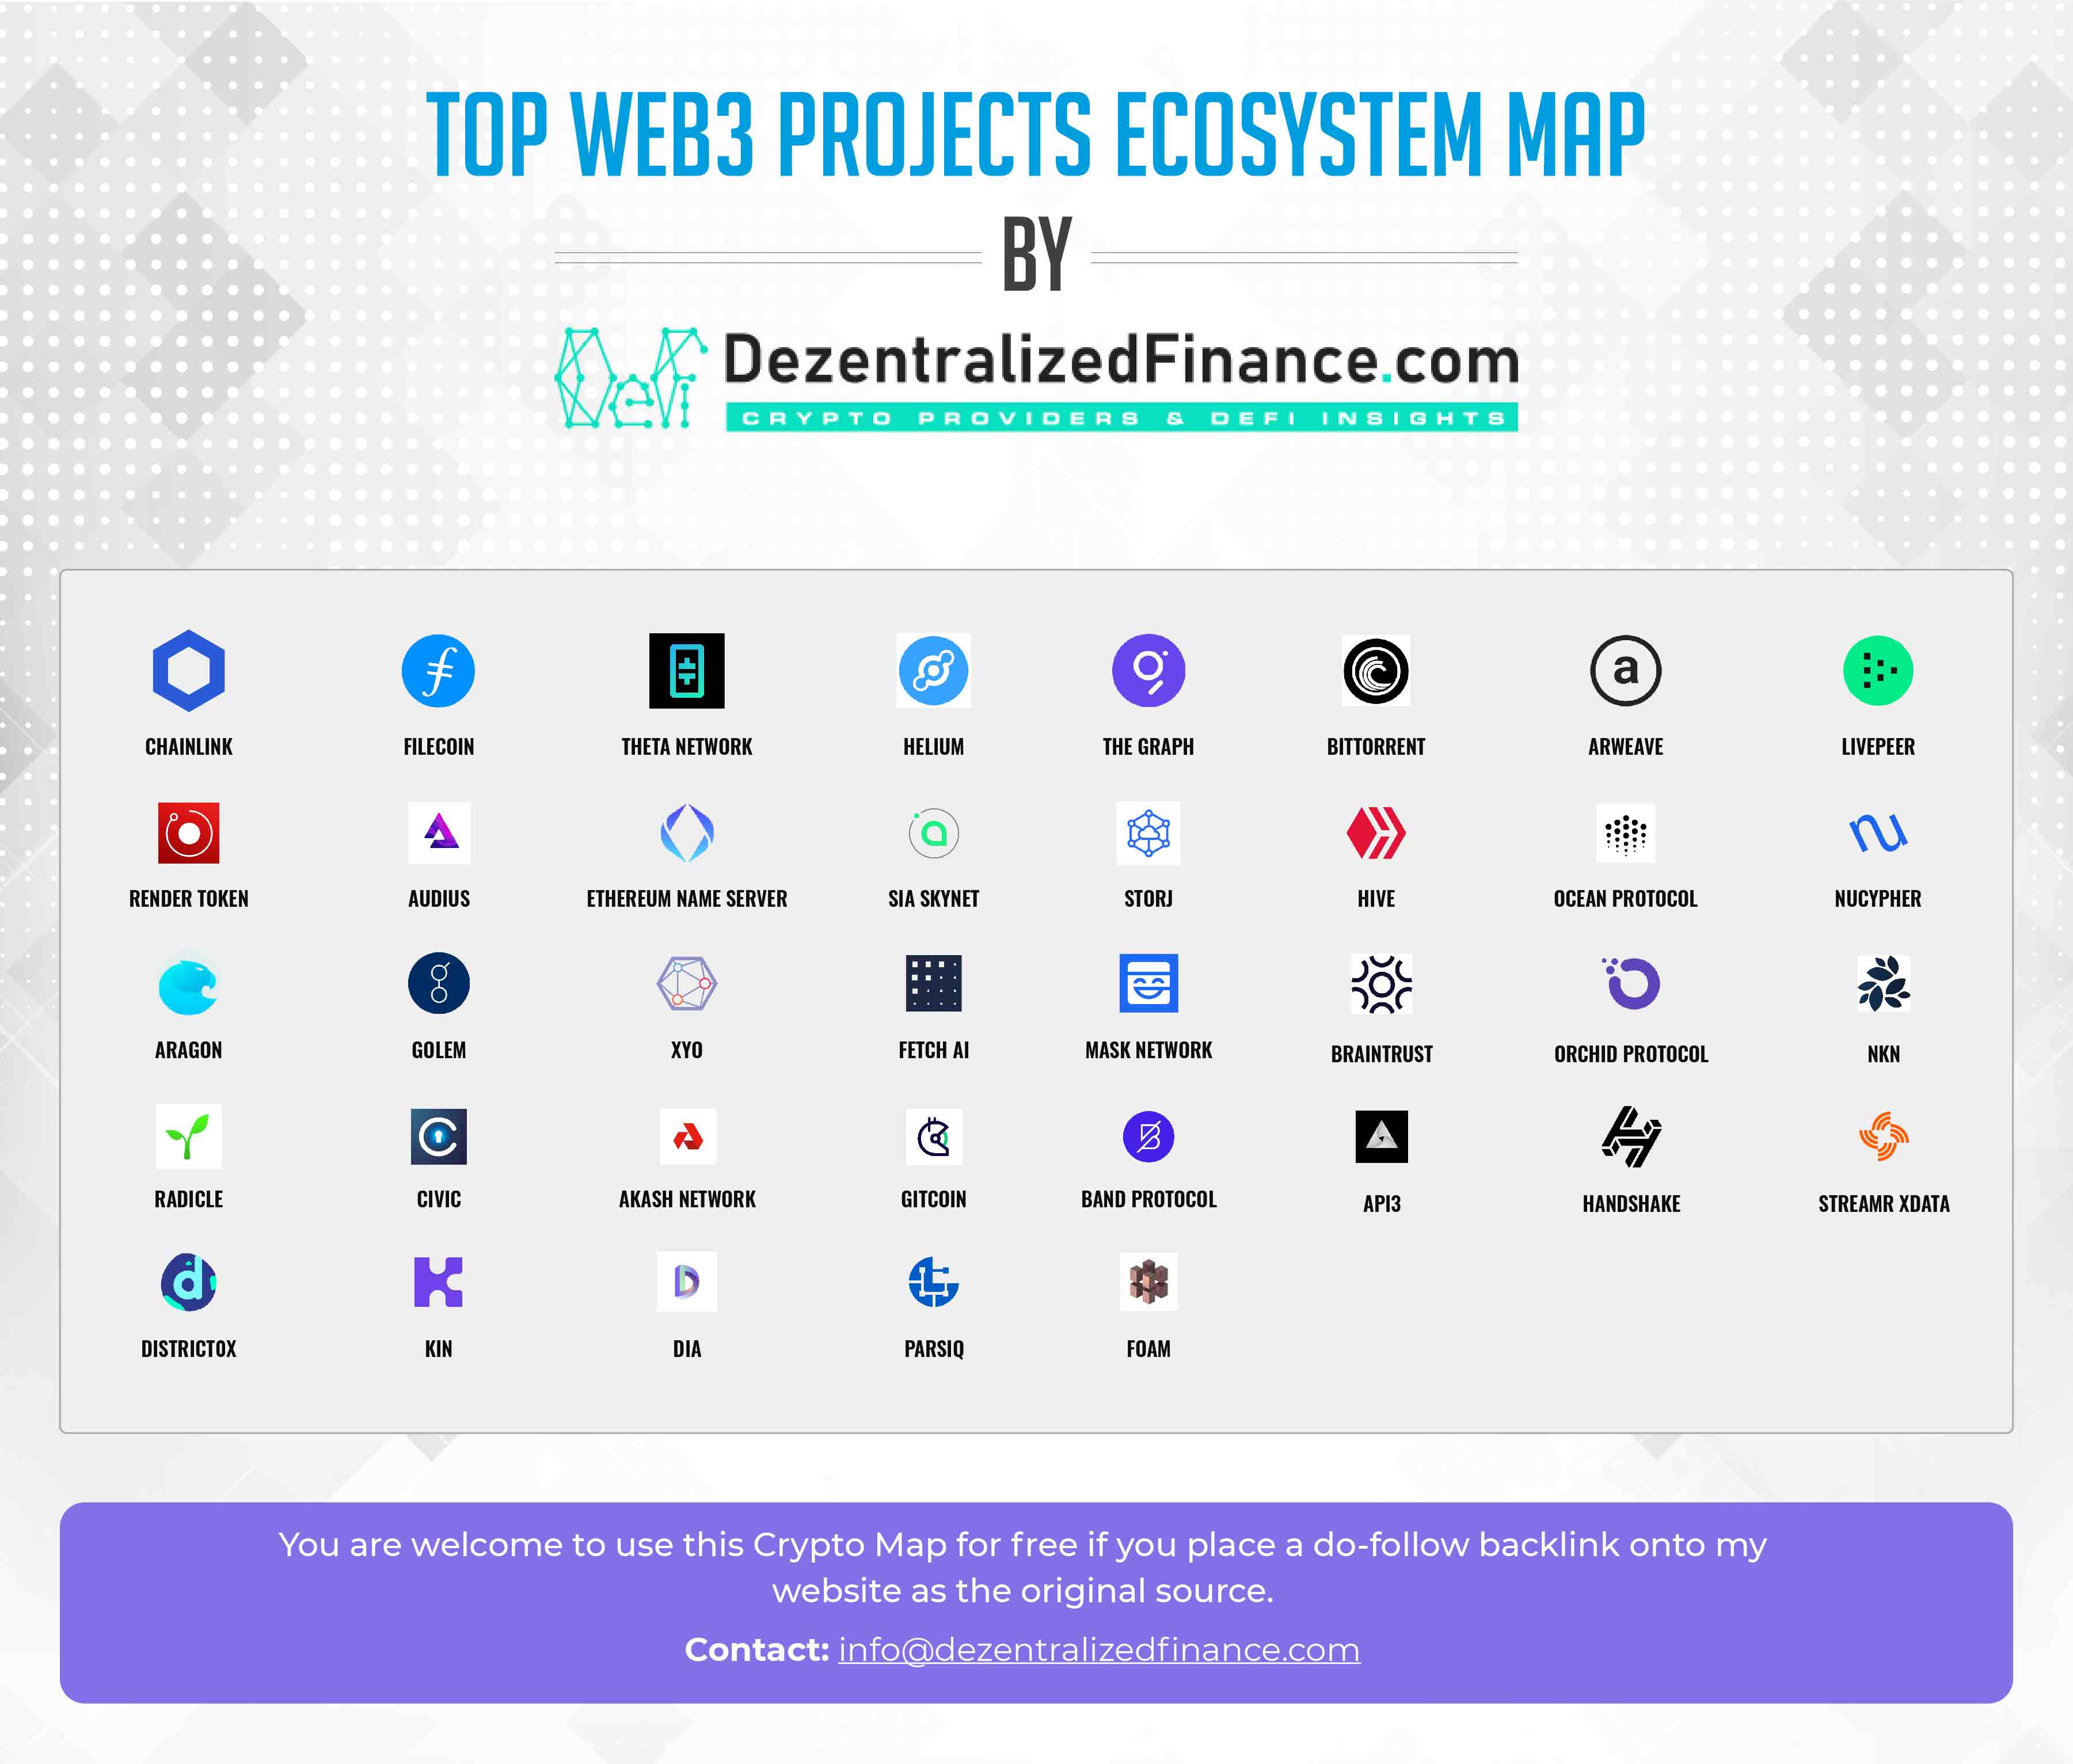 Top Web3 Projects Ecosystem